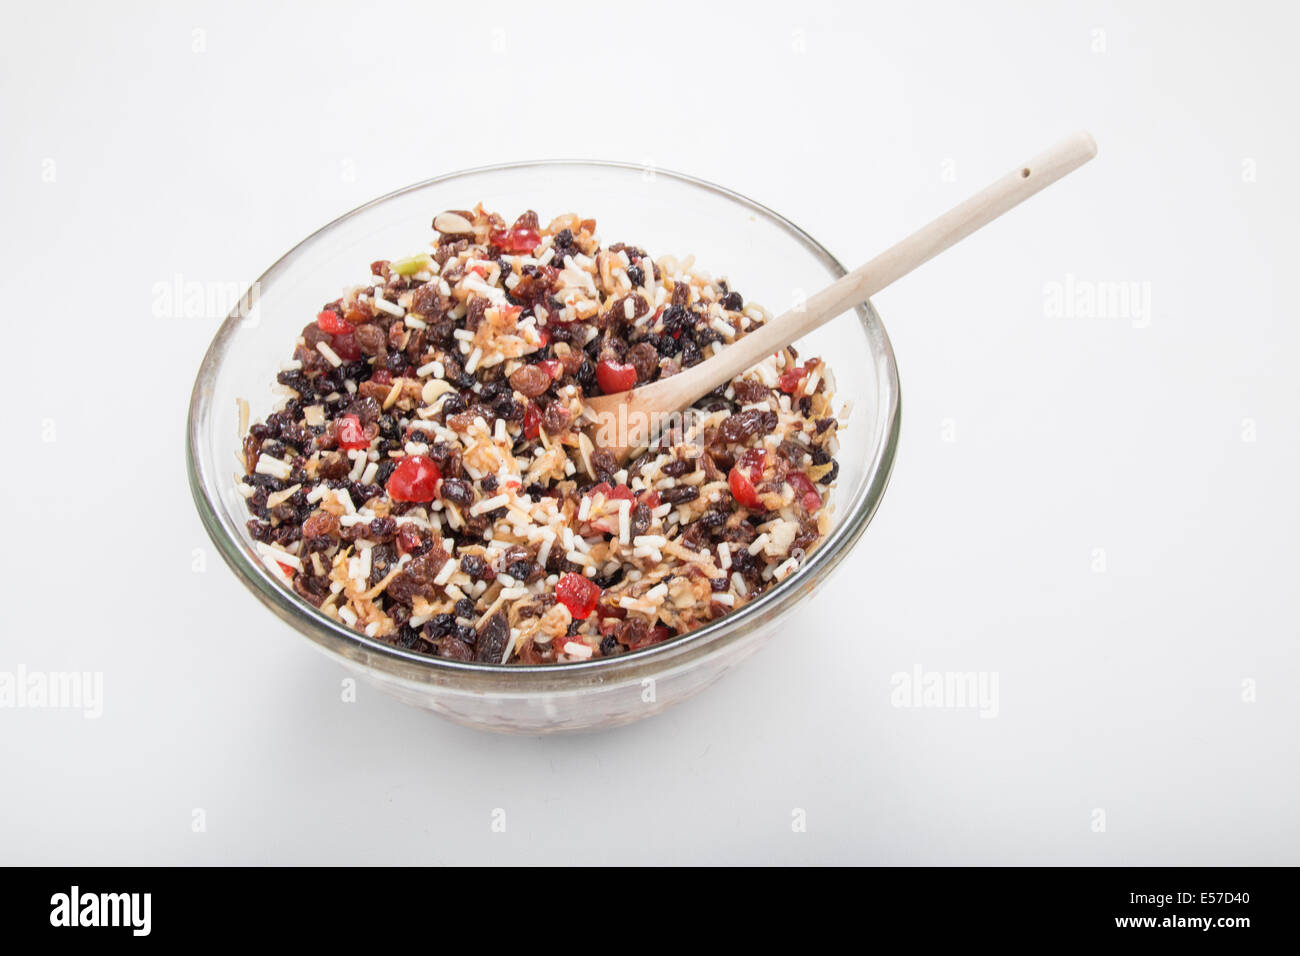 https://c8.alamy.com/comp/E57D40/making-traditional-mincemeat-in-a-mixing-bowl-with-wooden-spoon-ready-E57D40.jpg